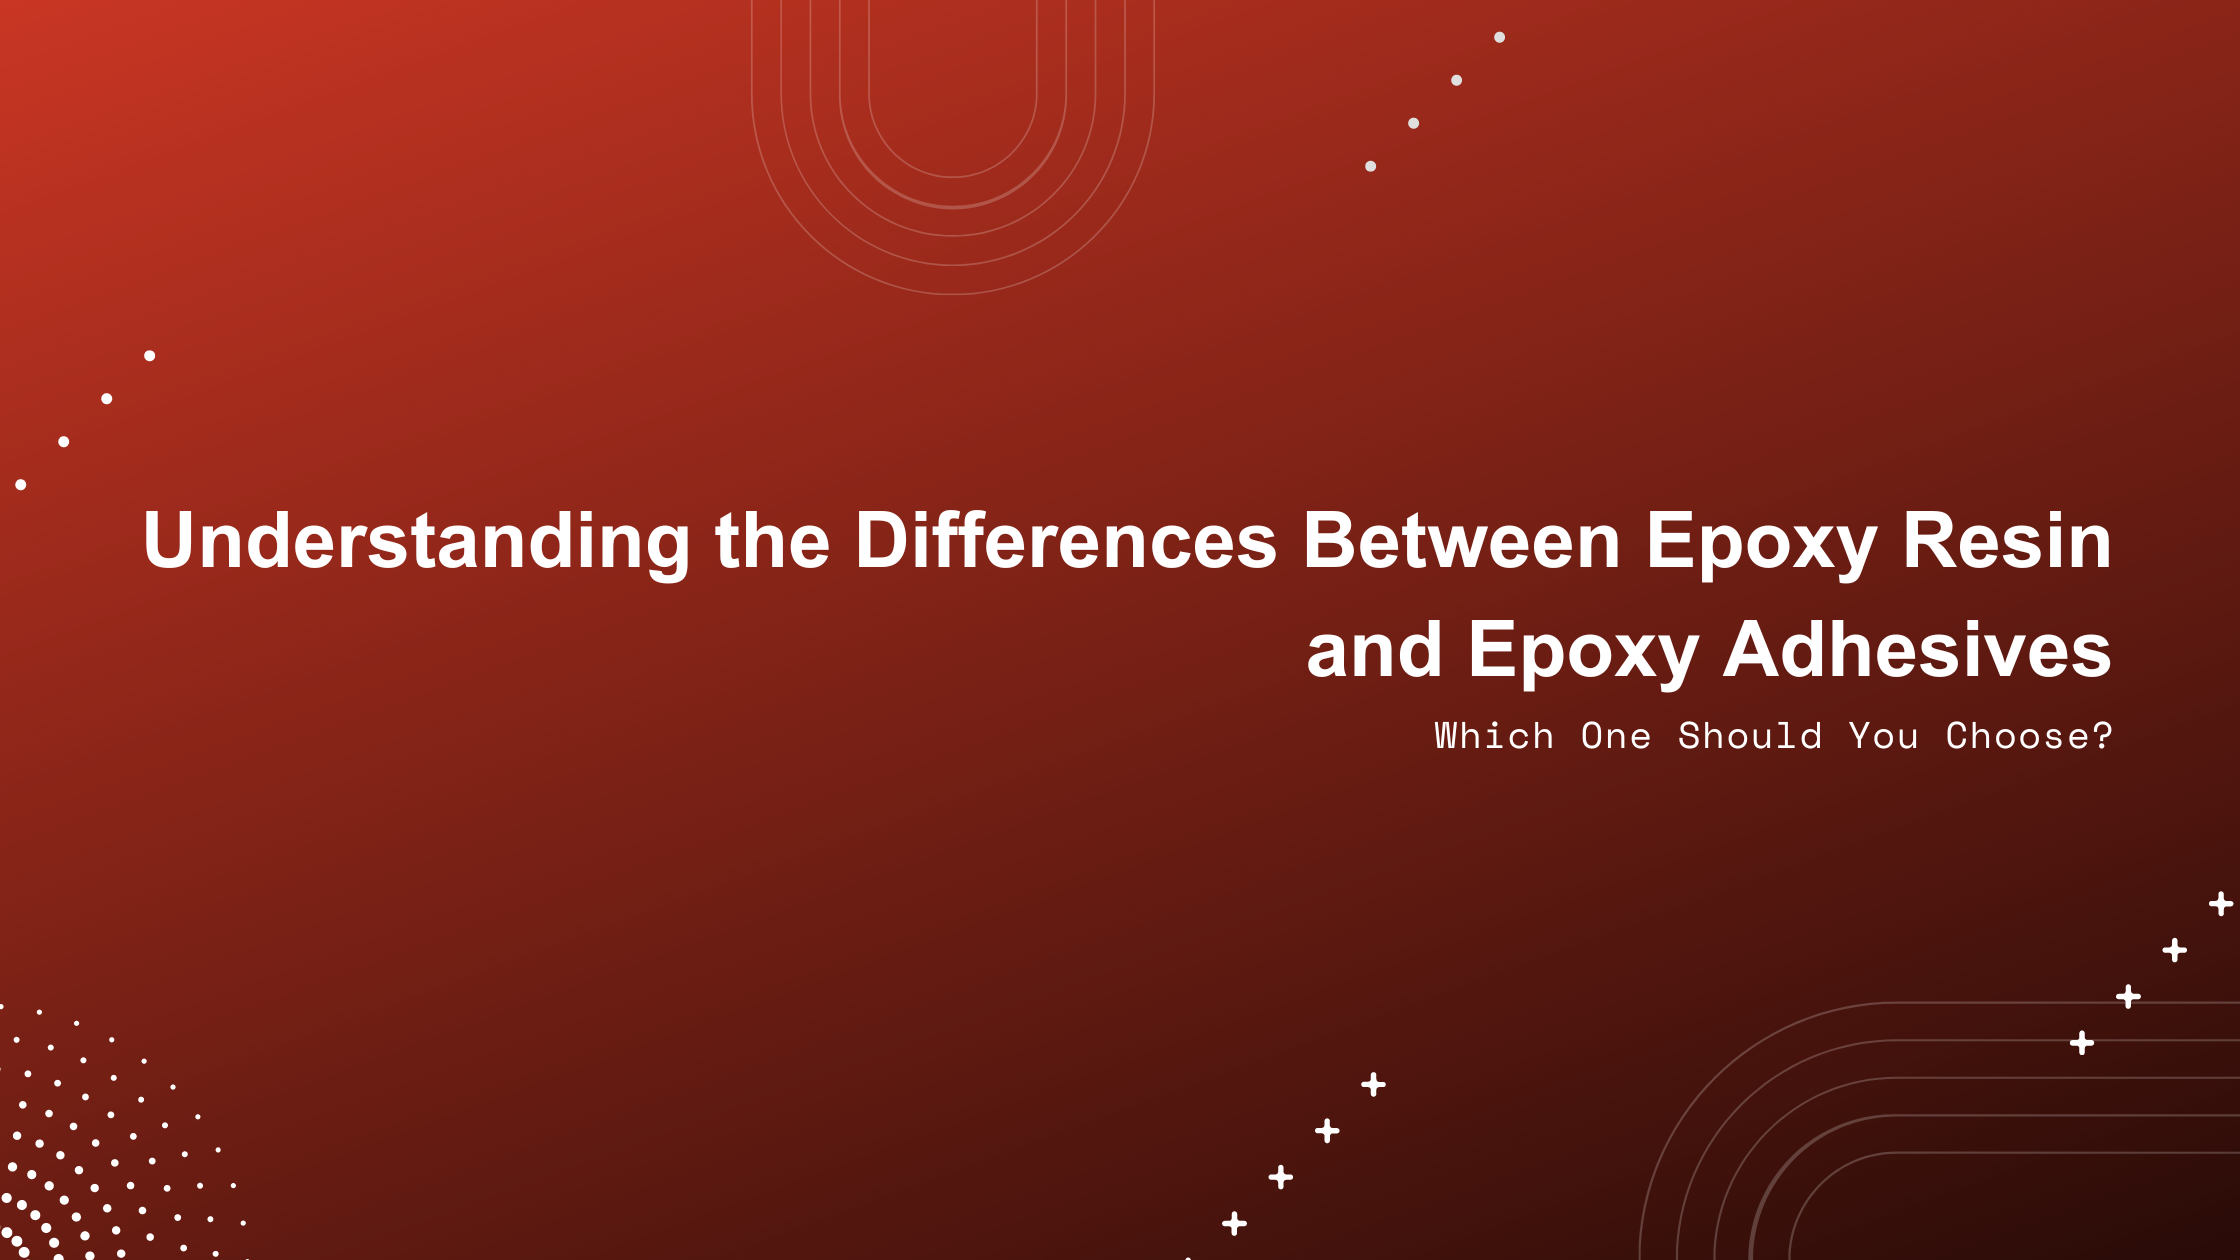 Differences Between Epoxy Resin and Epoxy Adhesives